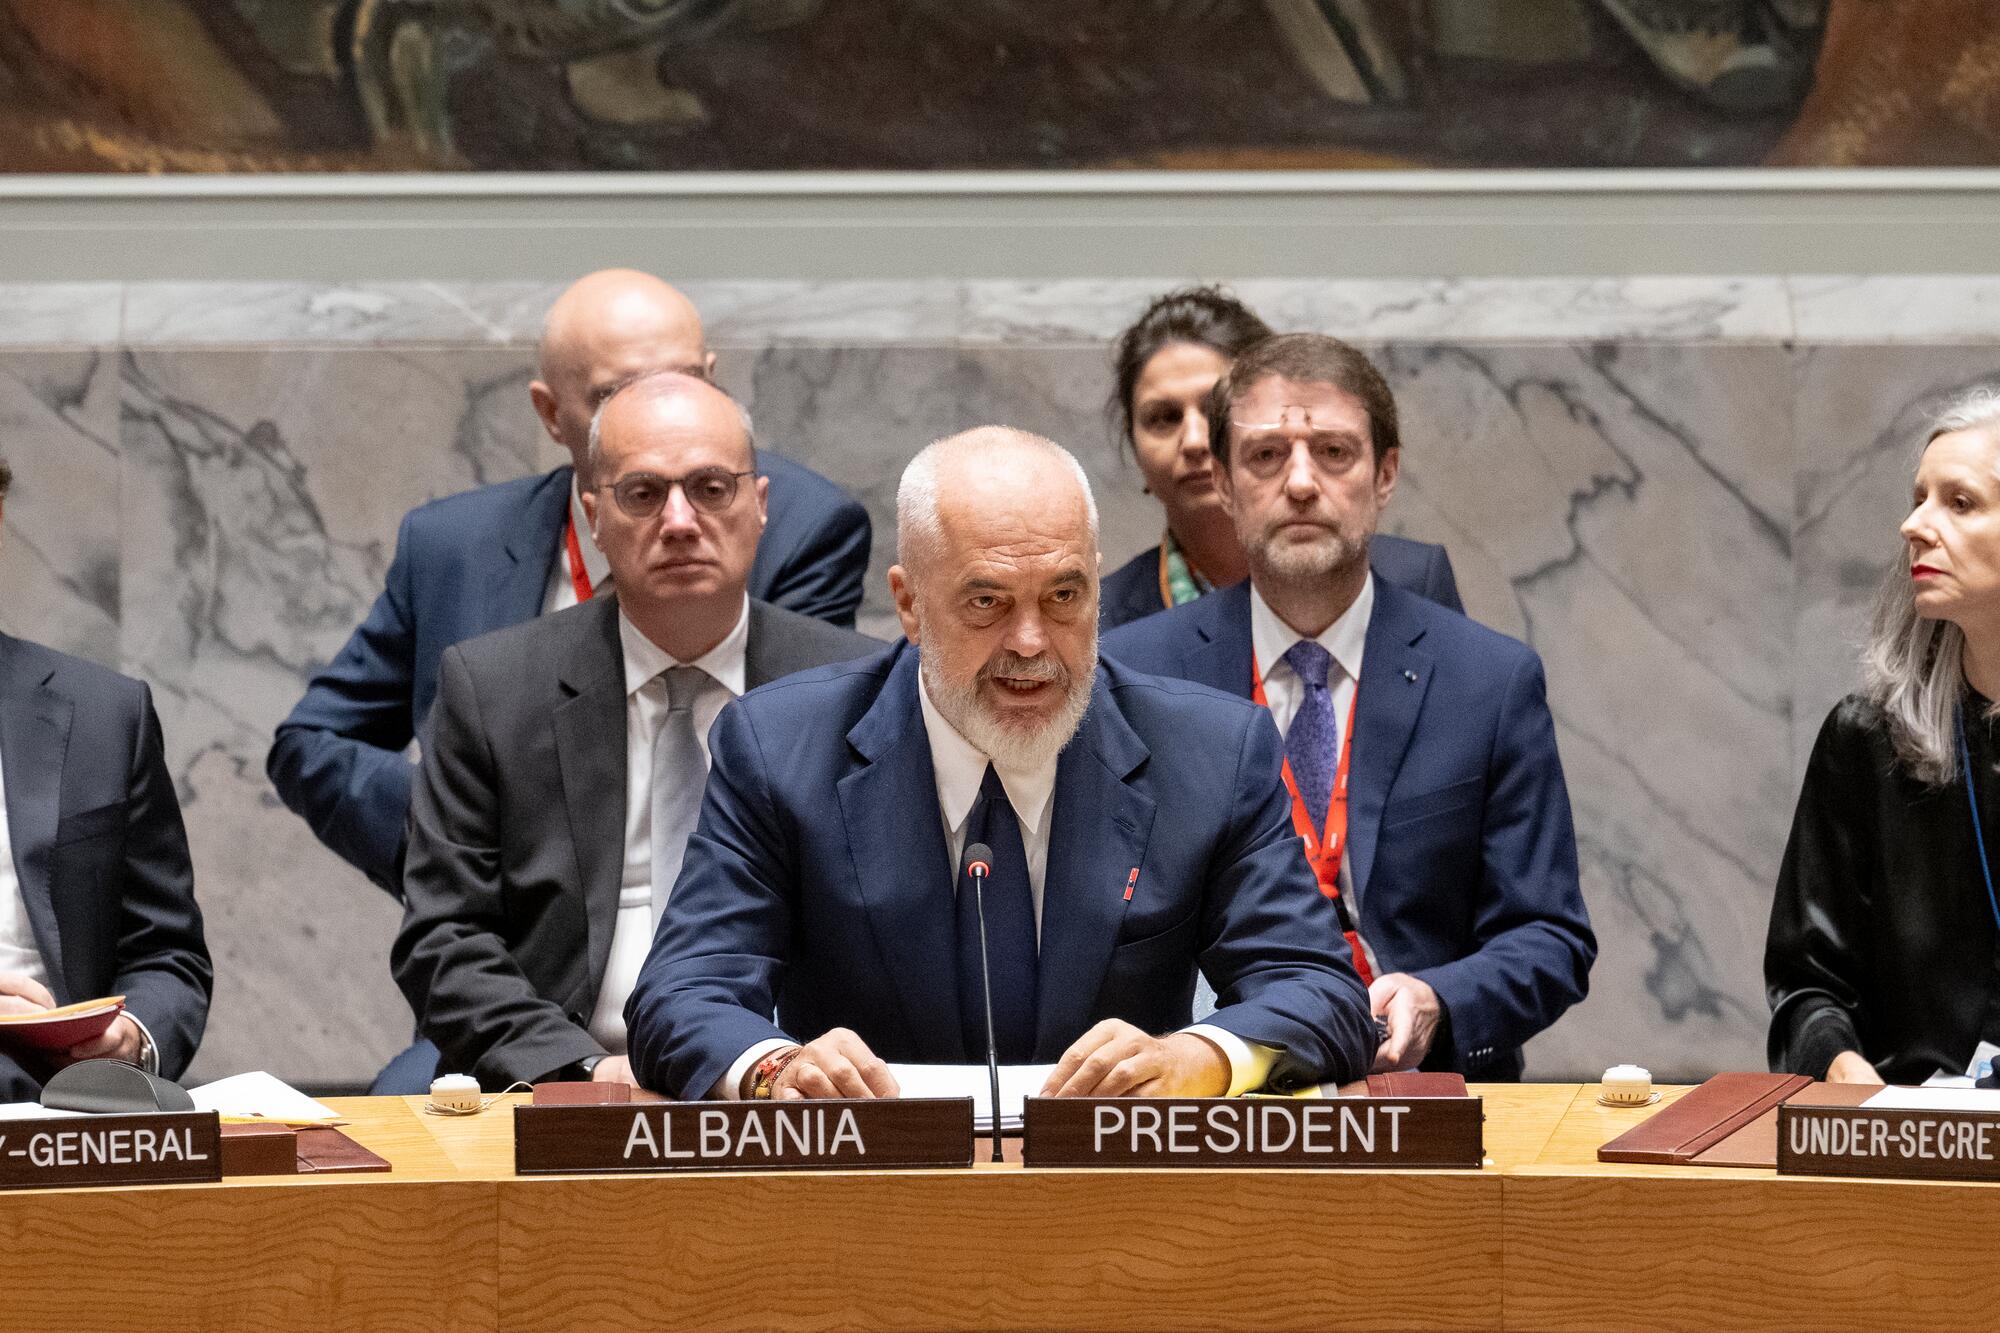 UN Security Council meeting held in New York under Albania’s chairmanship